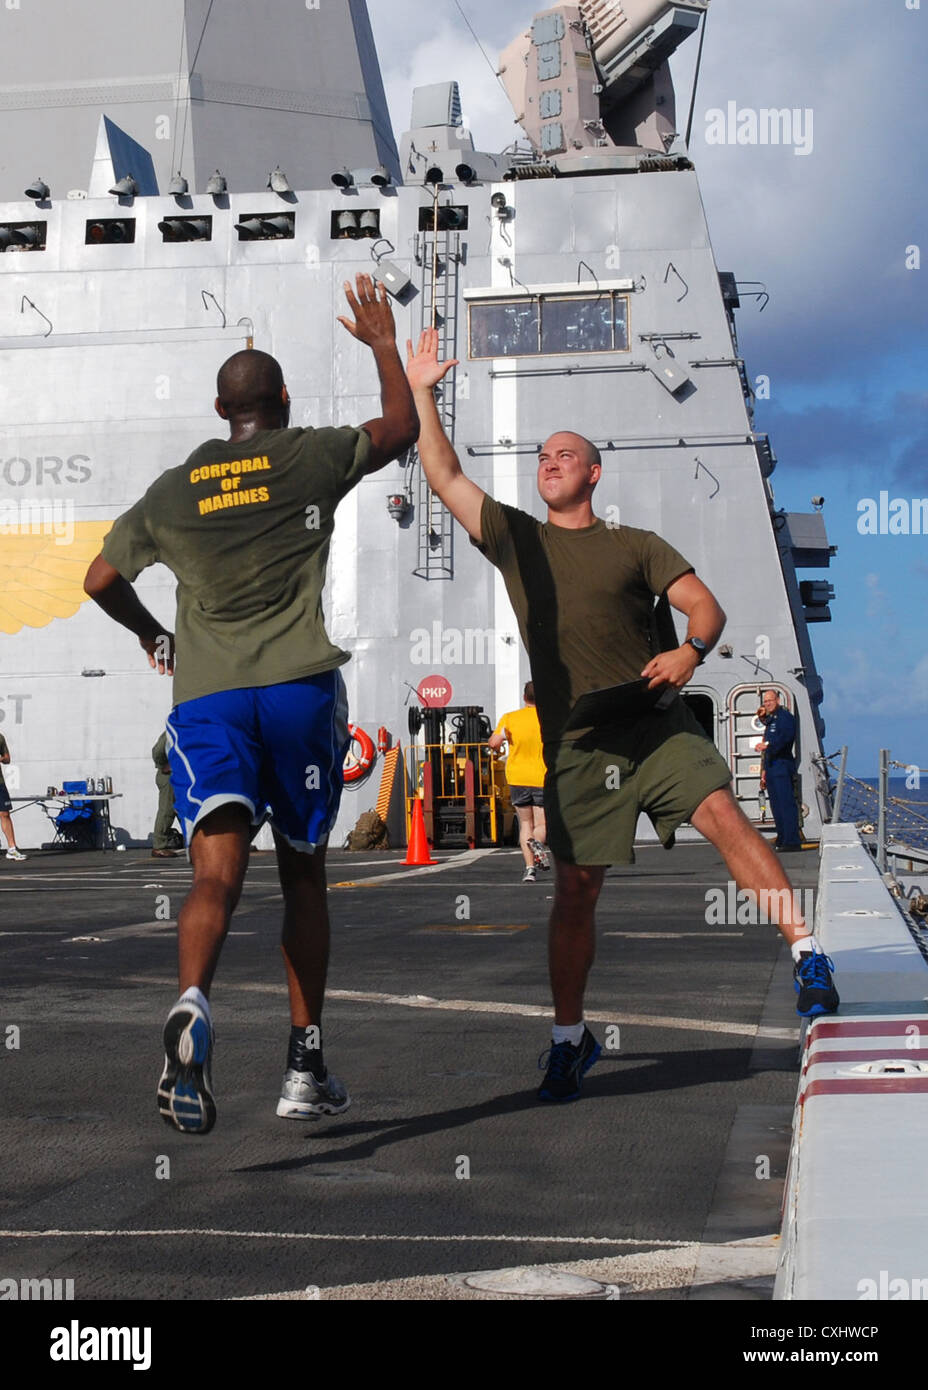 Cpl. Jonathan Clark high fives Cpl. Michael Valentinewilliams as he completes another lap during the Landaker 5k held by the “Purple Foxes” of Marine Medium Helicopter Squadron (HMM) 364 (REIN) aboard amphibious transport dock ship USS Green Bay (LPD 20). Green Bay is part of the Peleliu Amphibious Ready Group currently underway on a Western Pacific deployment with amphibious assault ship USS Peleliu (LHA 5) and amphibious dock landing ship USS Rushmore (LSD 47). Stock Photo